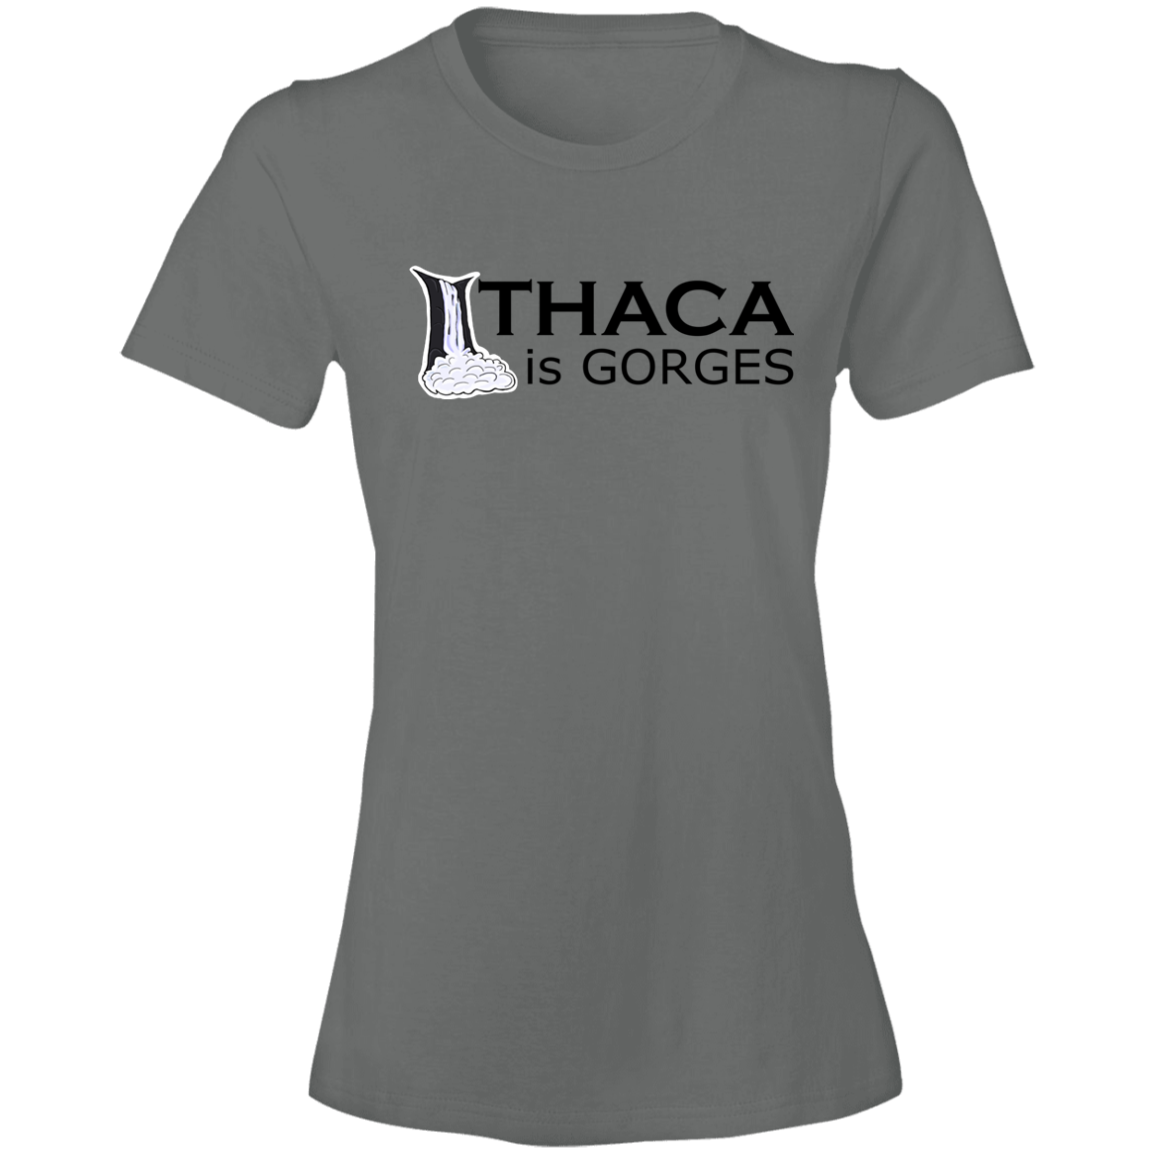 Ithaca is Gorges Lightweight Ladies T-Shirt (Color Graphic)